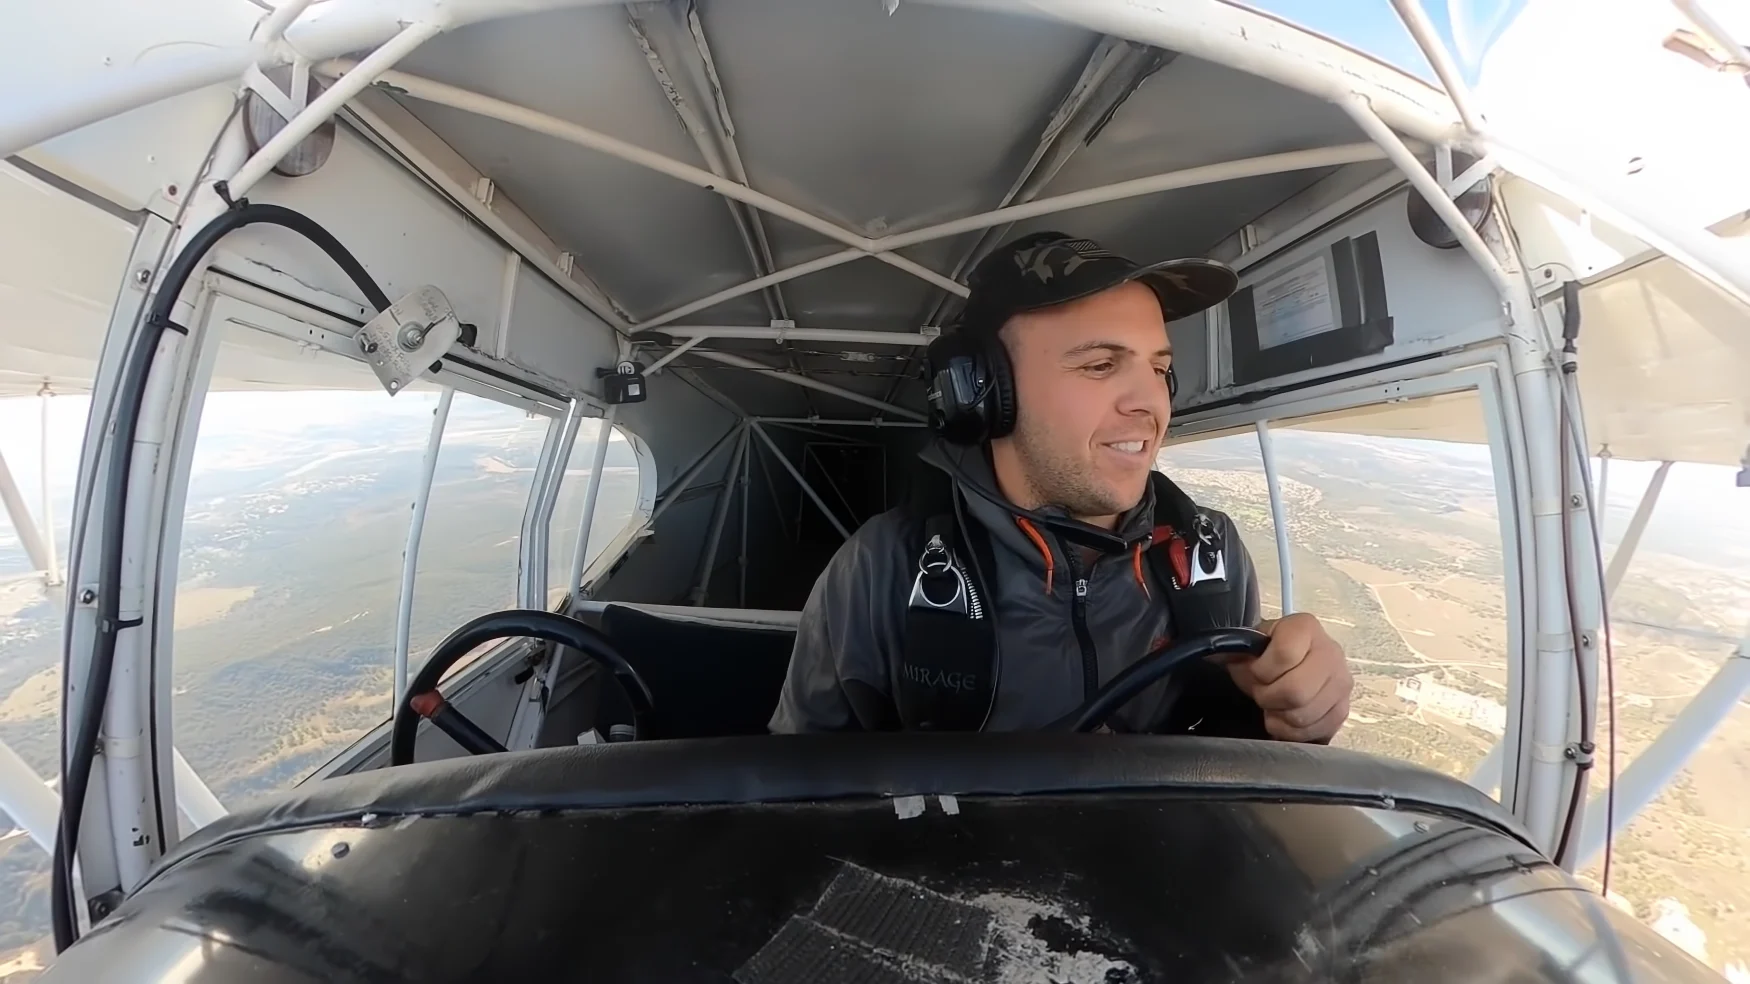 YouTuber Trevor Jacob flying in a small airplane. Cockpit-camera view from head-on.